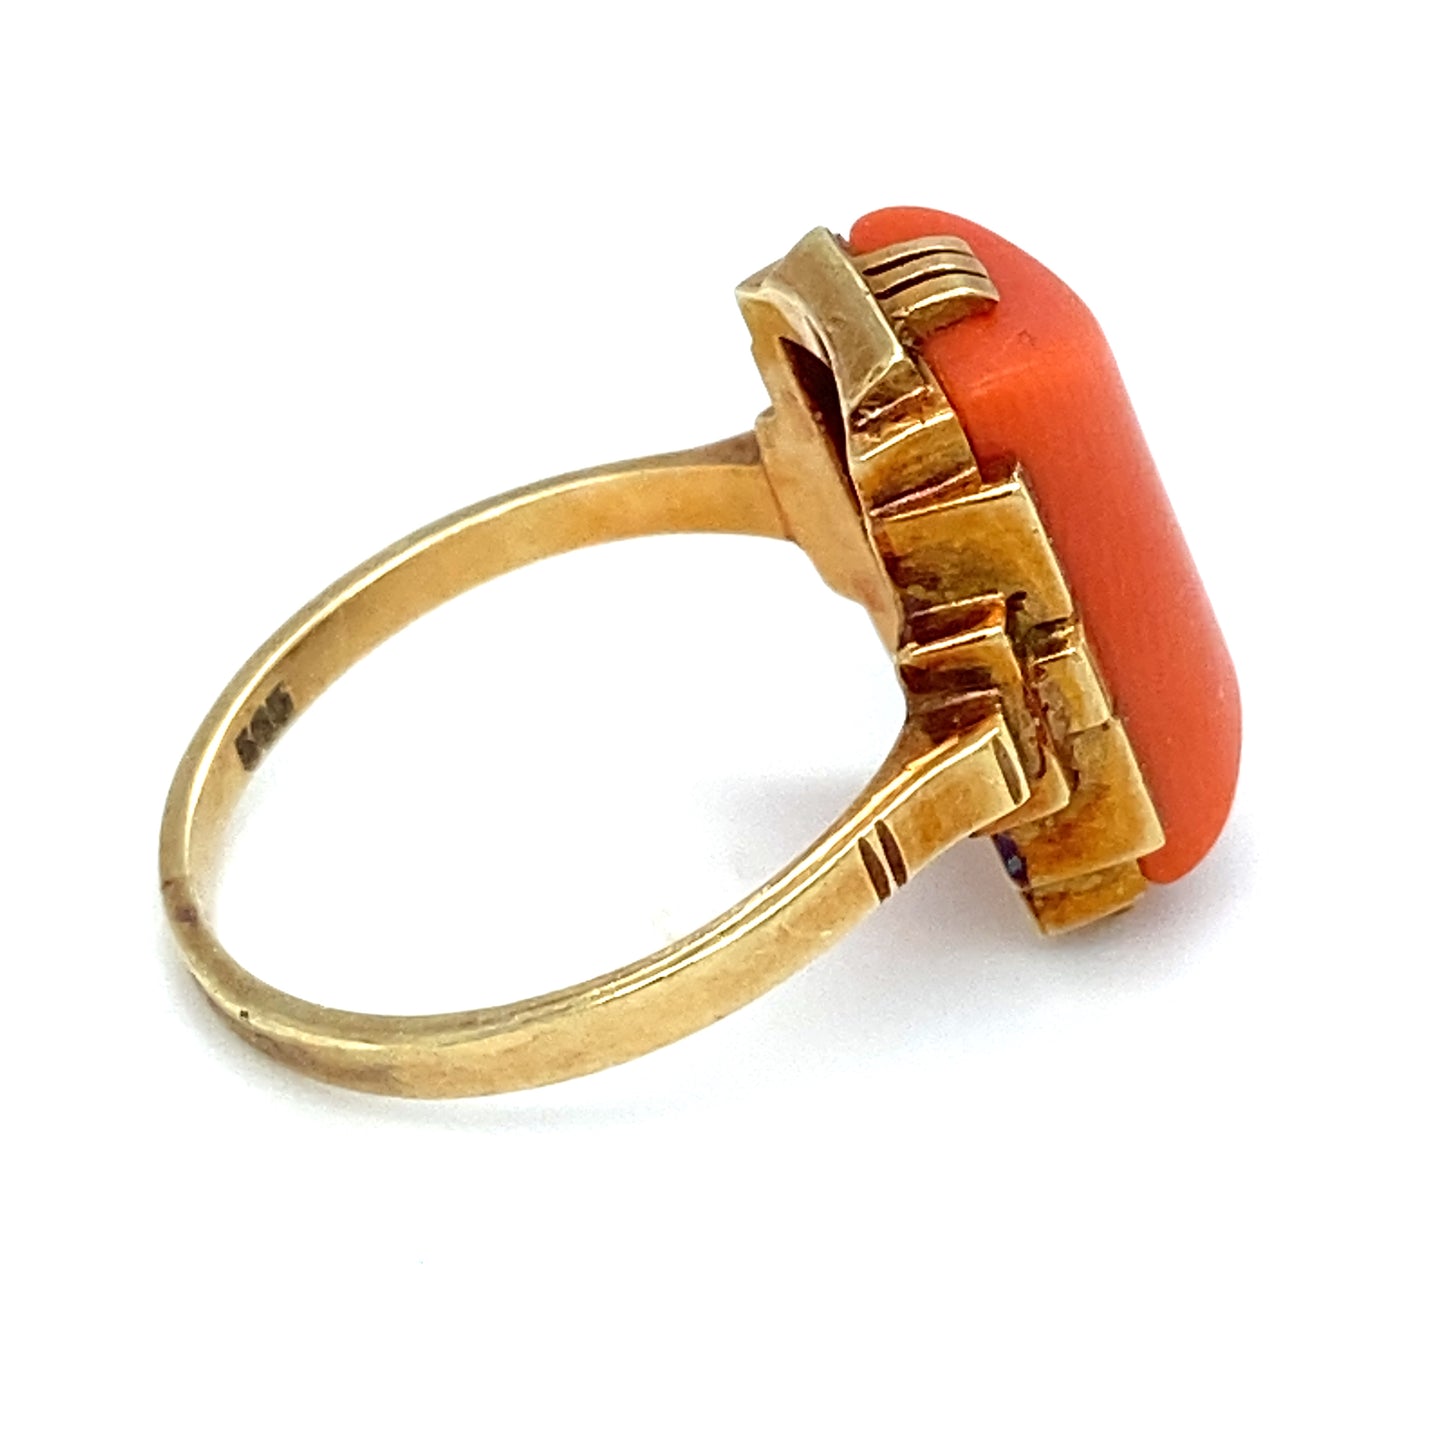 Circa 1940s Art Deco Style Rectangular Coral Ring in 14K Gold